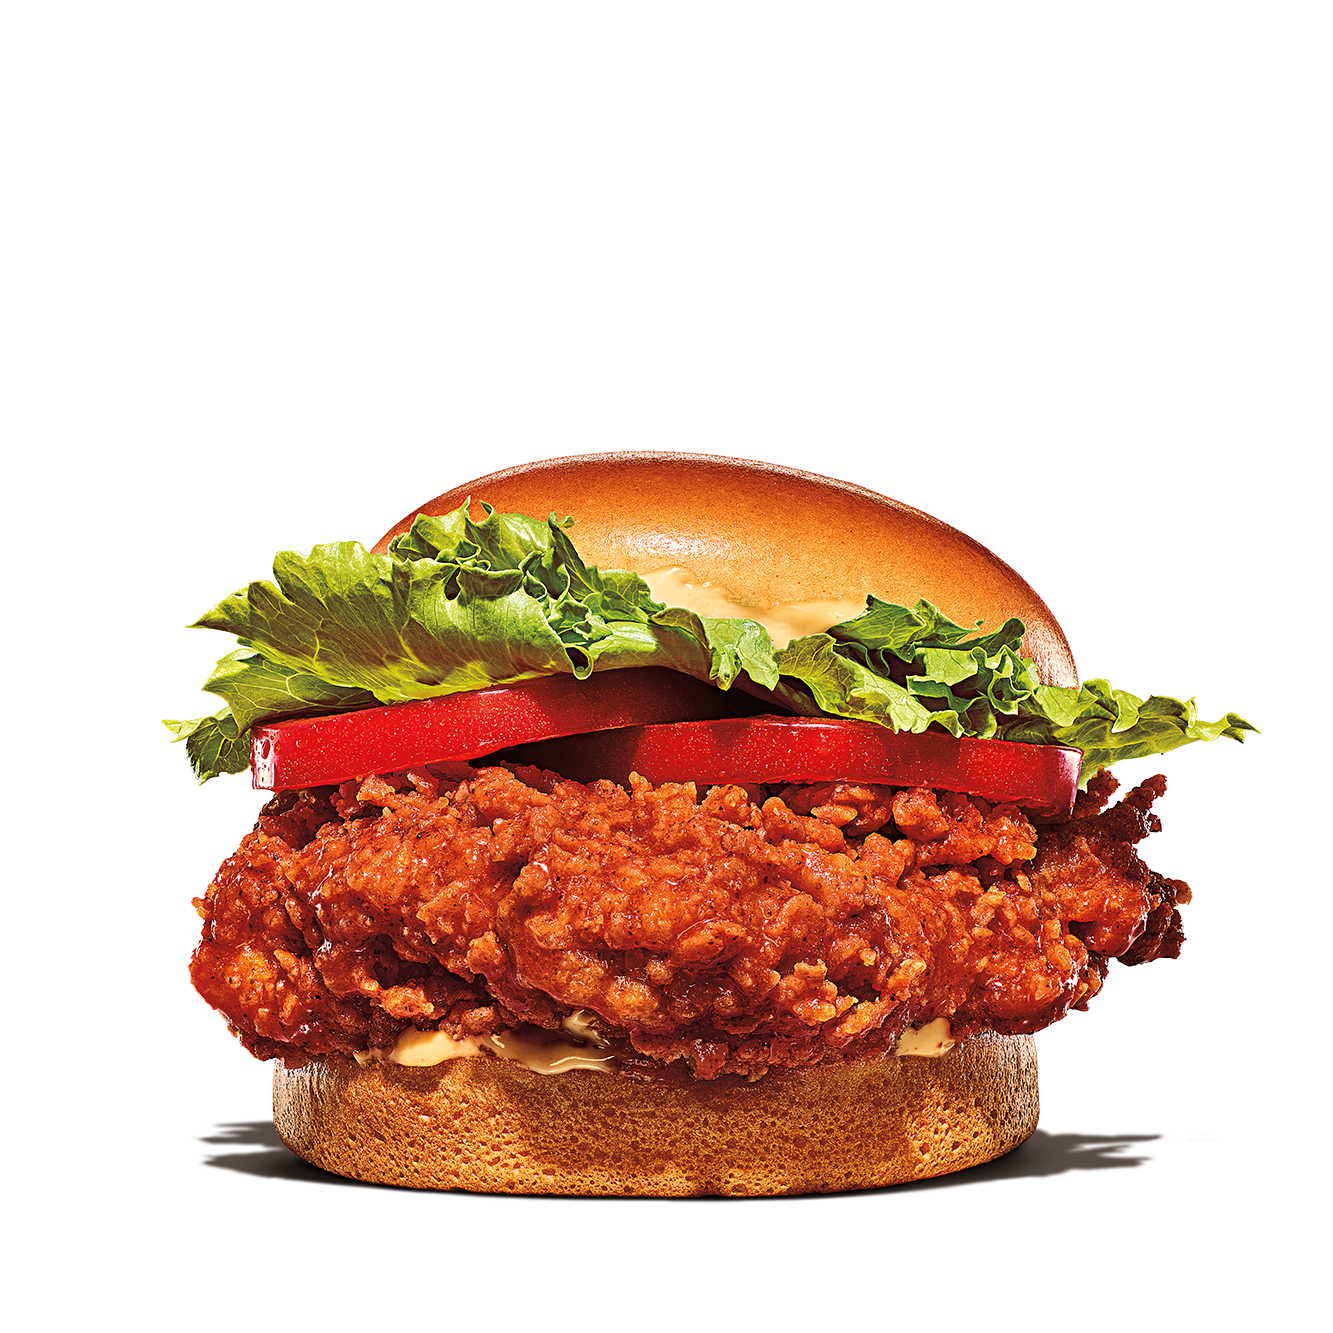 Burger King Spicy Ch'King Deluxe Sandwich Nutrition Facts